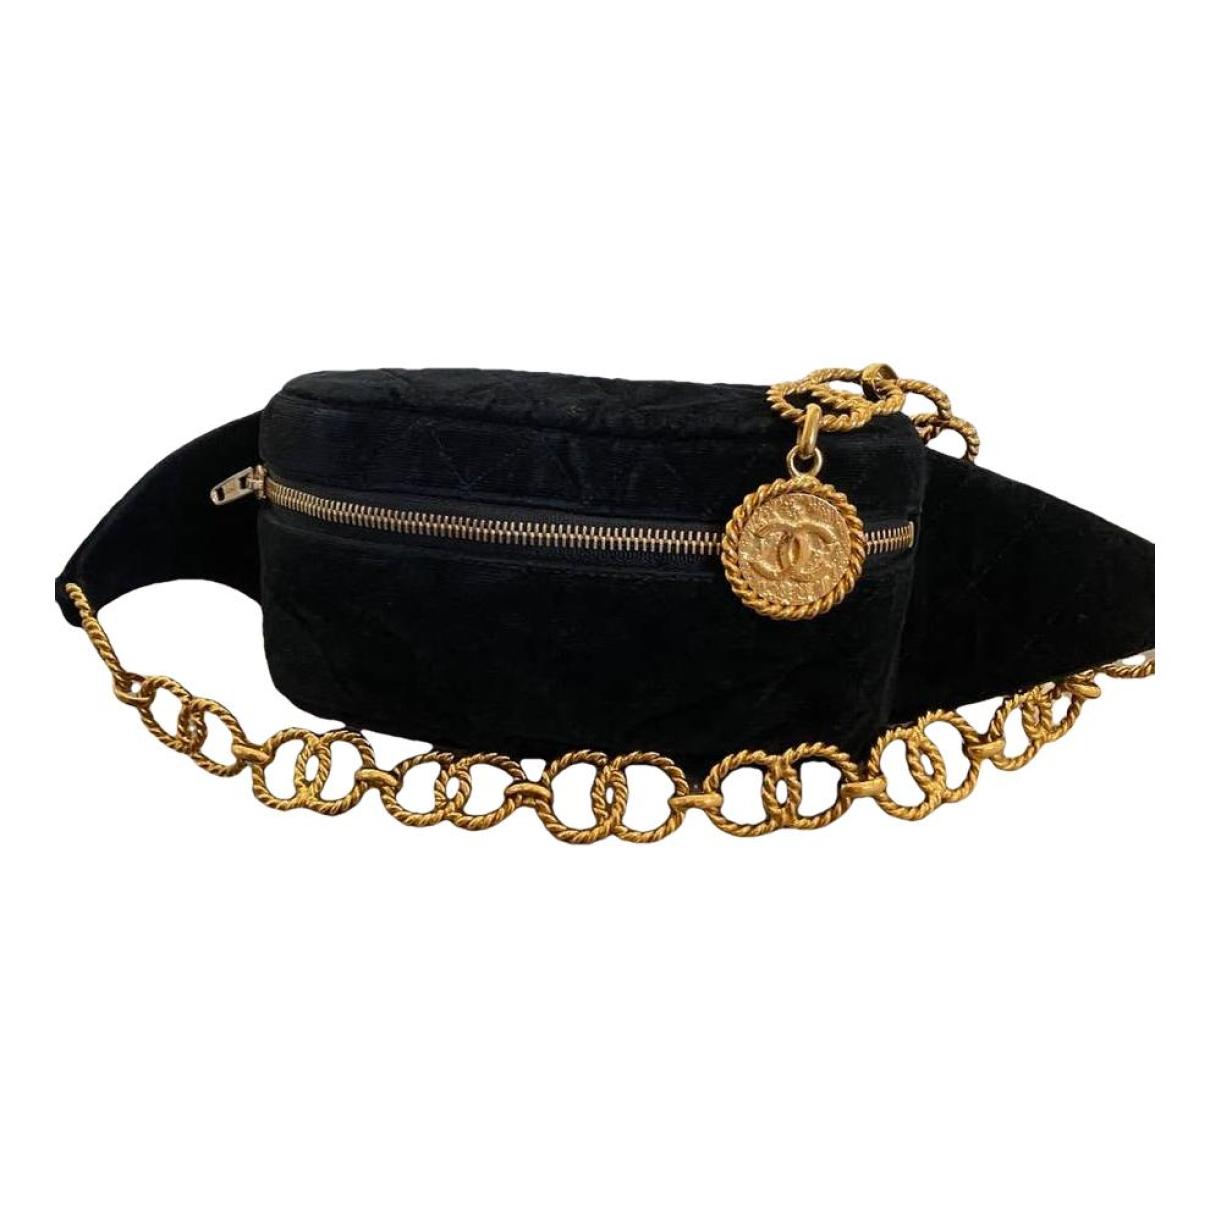 Chanel Pre-owned 1996 CC logo-embossed Clutch Bag - Black